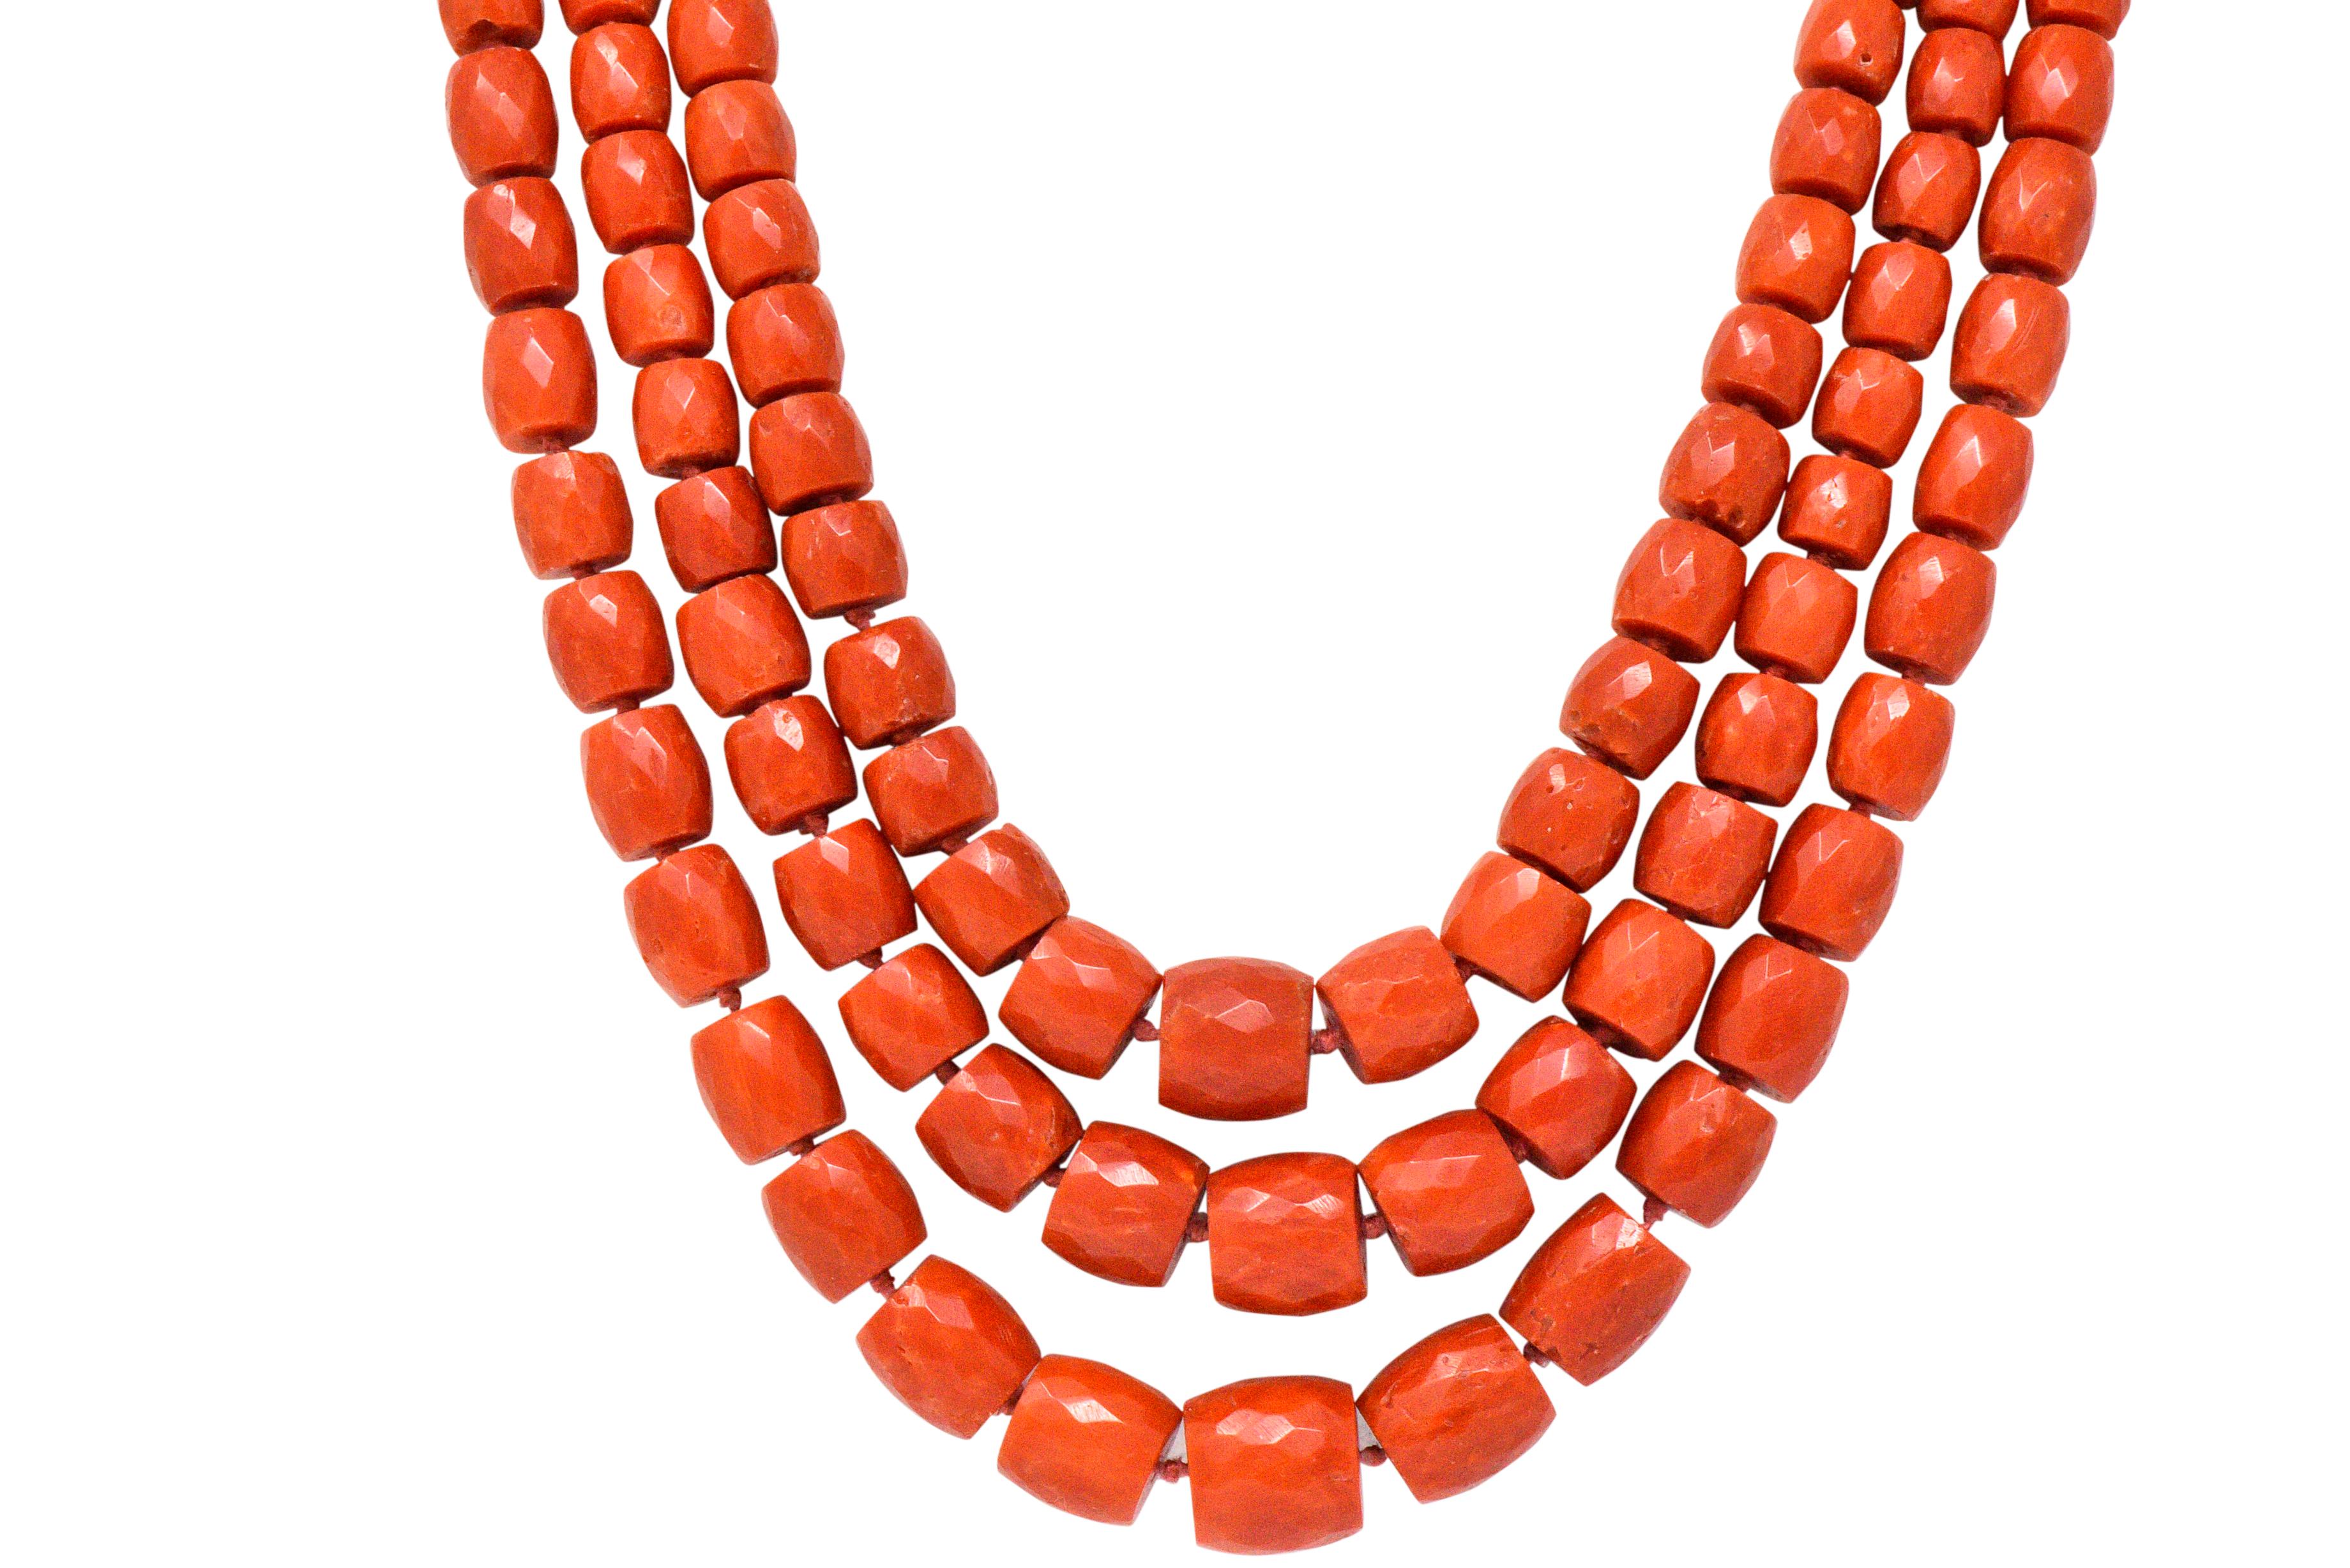 Featuring 3 strands of graduated, faceted, tubular shaped natural coral beads, 174 beads, measuring approximately 6.0 x 6.7 to 11.3 x 12.2 mm, reddish orange

Completed by a 12 karat inscribed gold clasp with a faceted oval coral, measuring